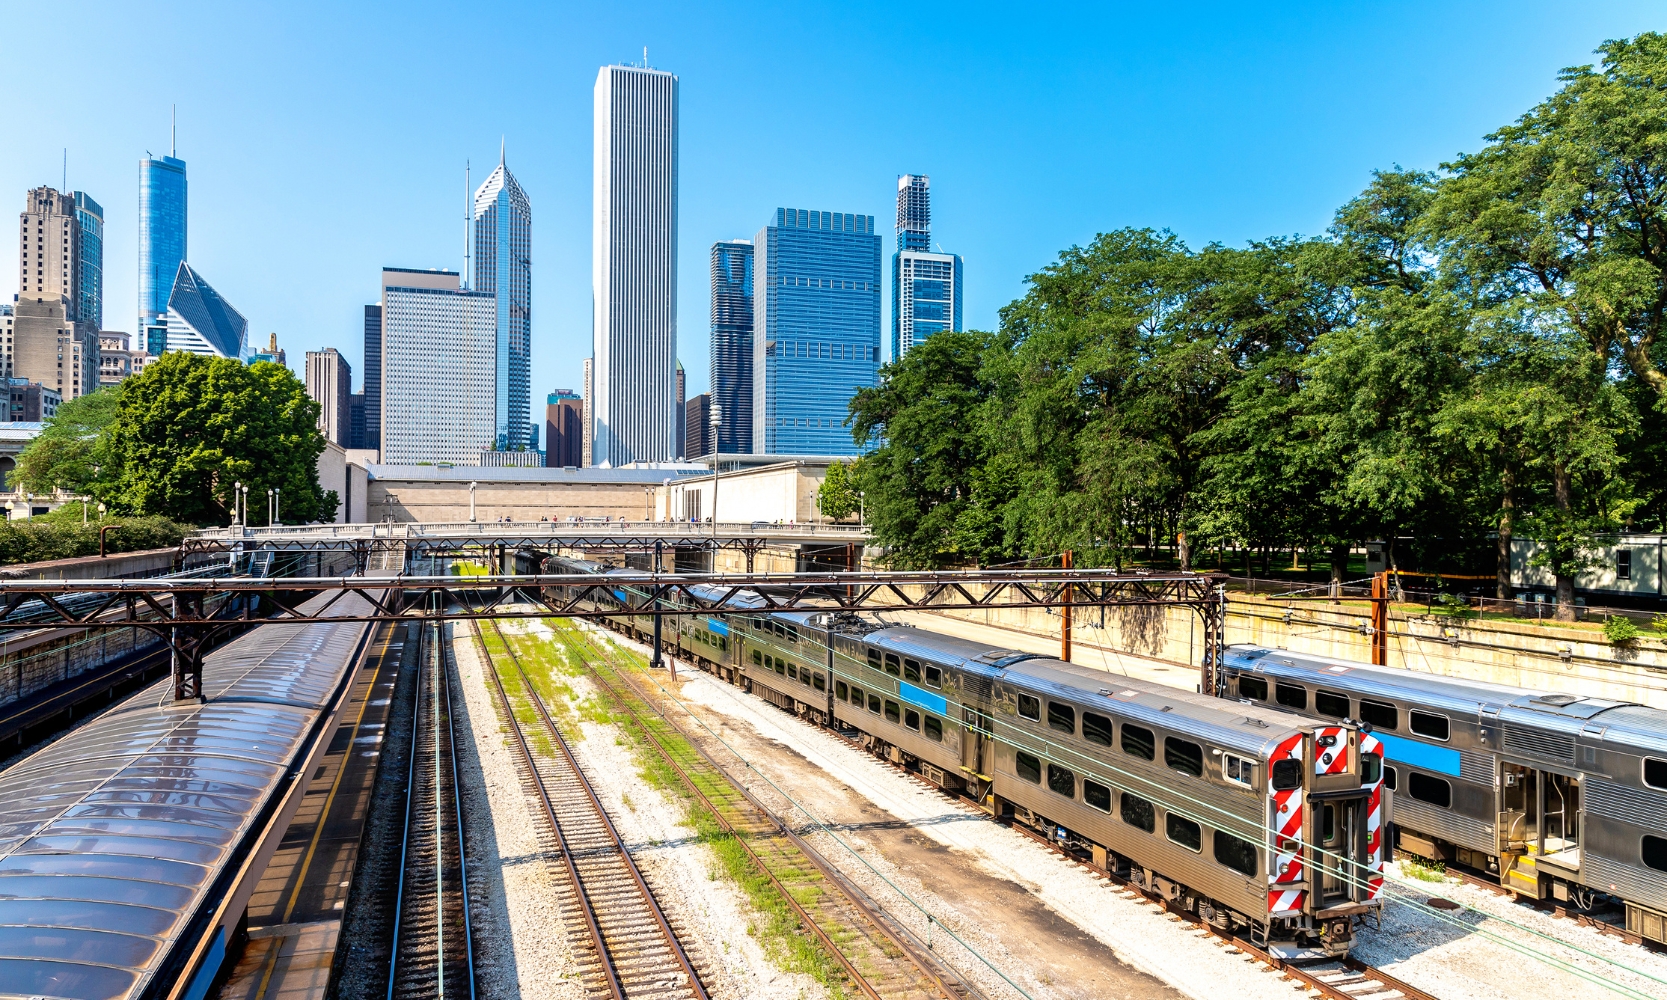 An image of a Chicago public train traveling into the city with the Chicago skyline in front of it